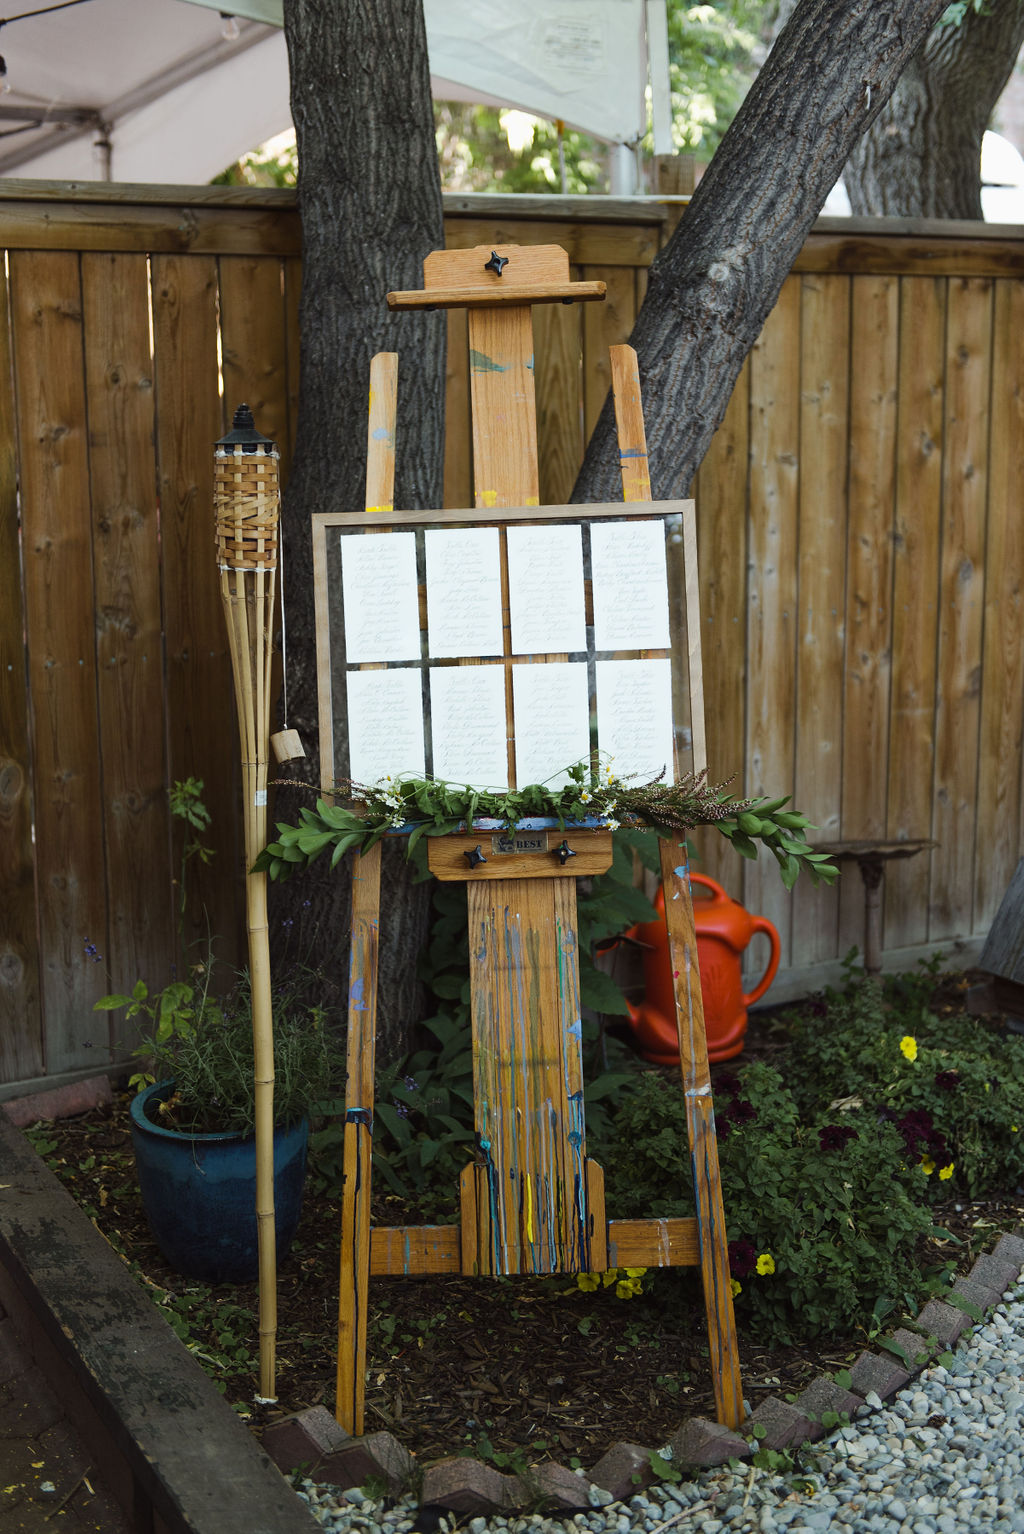 Modern seating chart display photographed next to a tiki torch